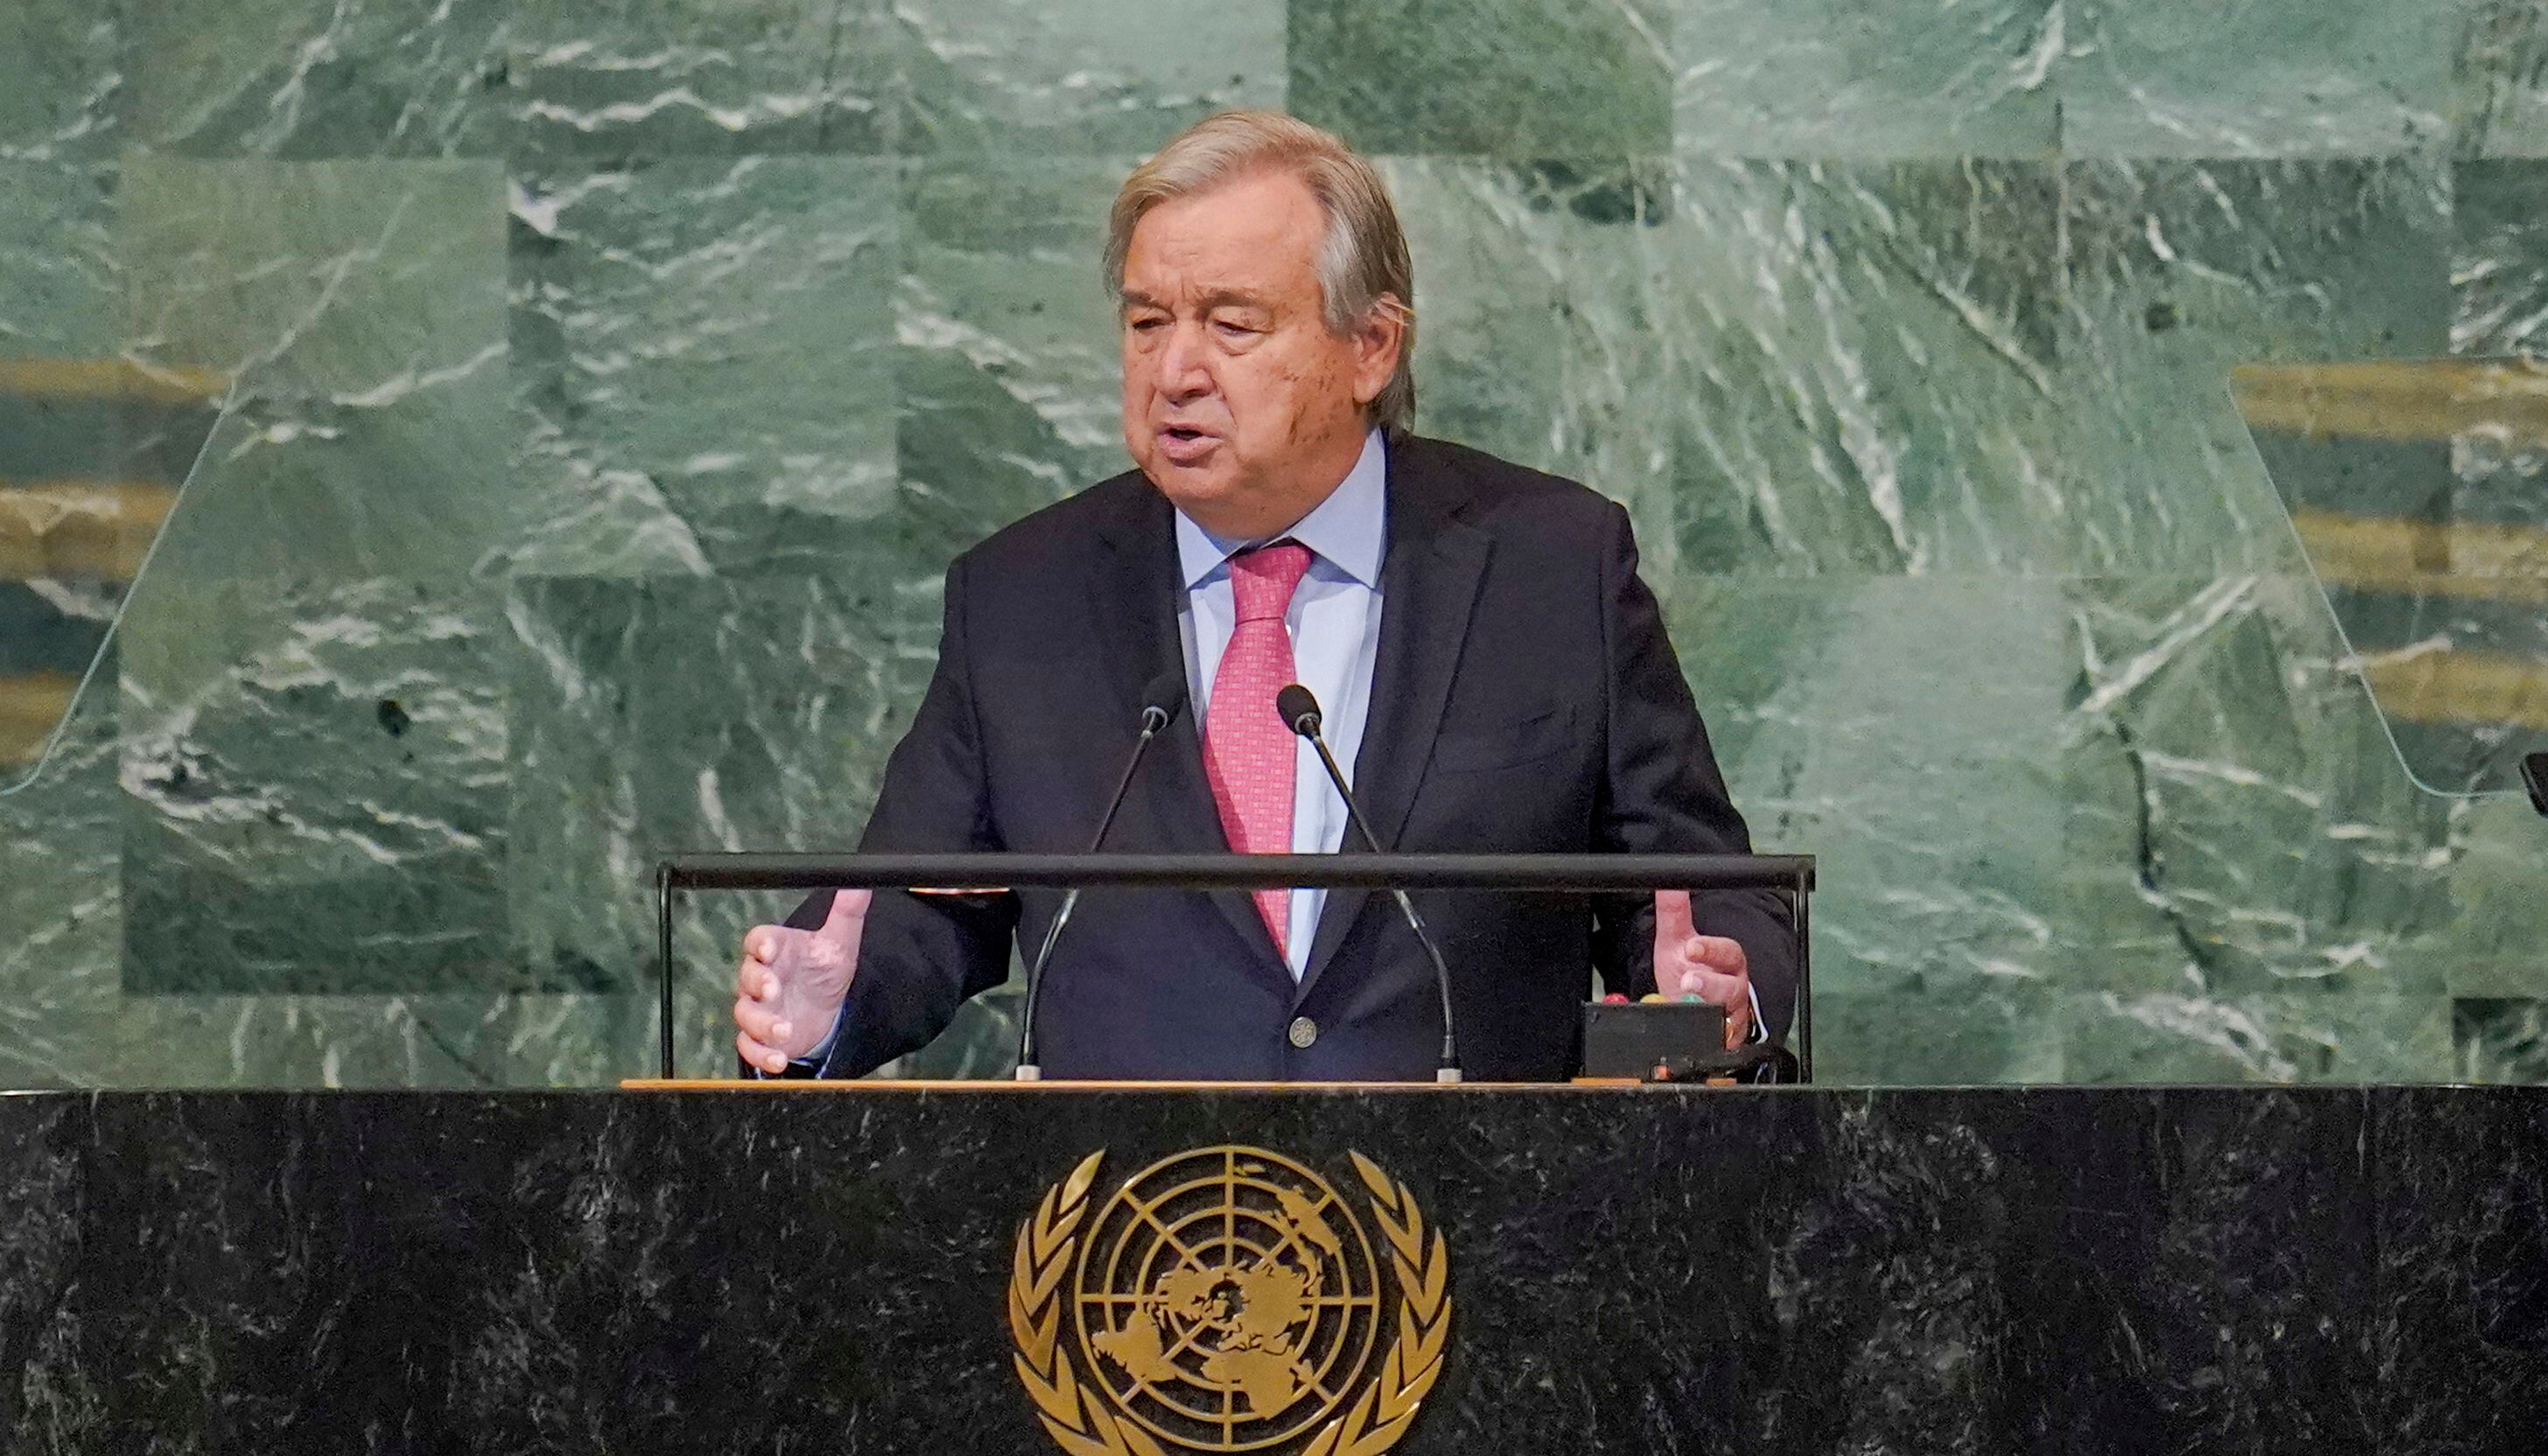 UN Antonio Guterres chief urges countries to impose tax on fossil fuel companies